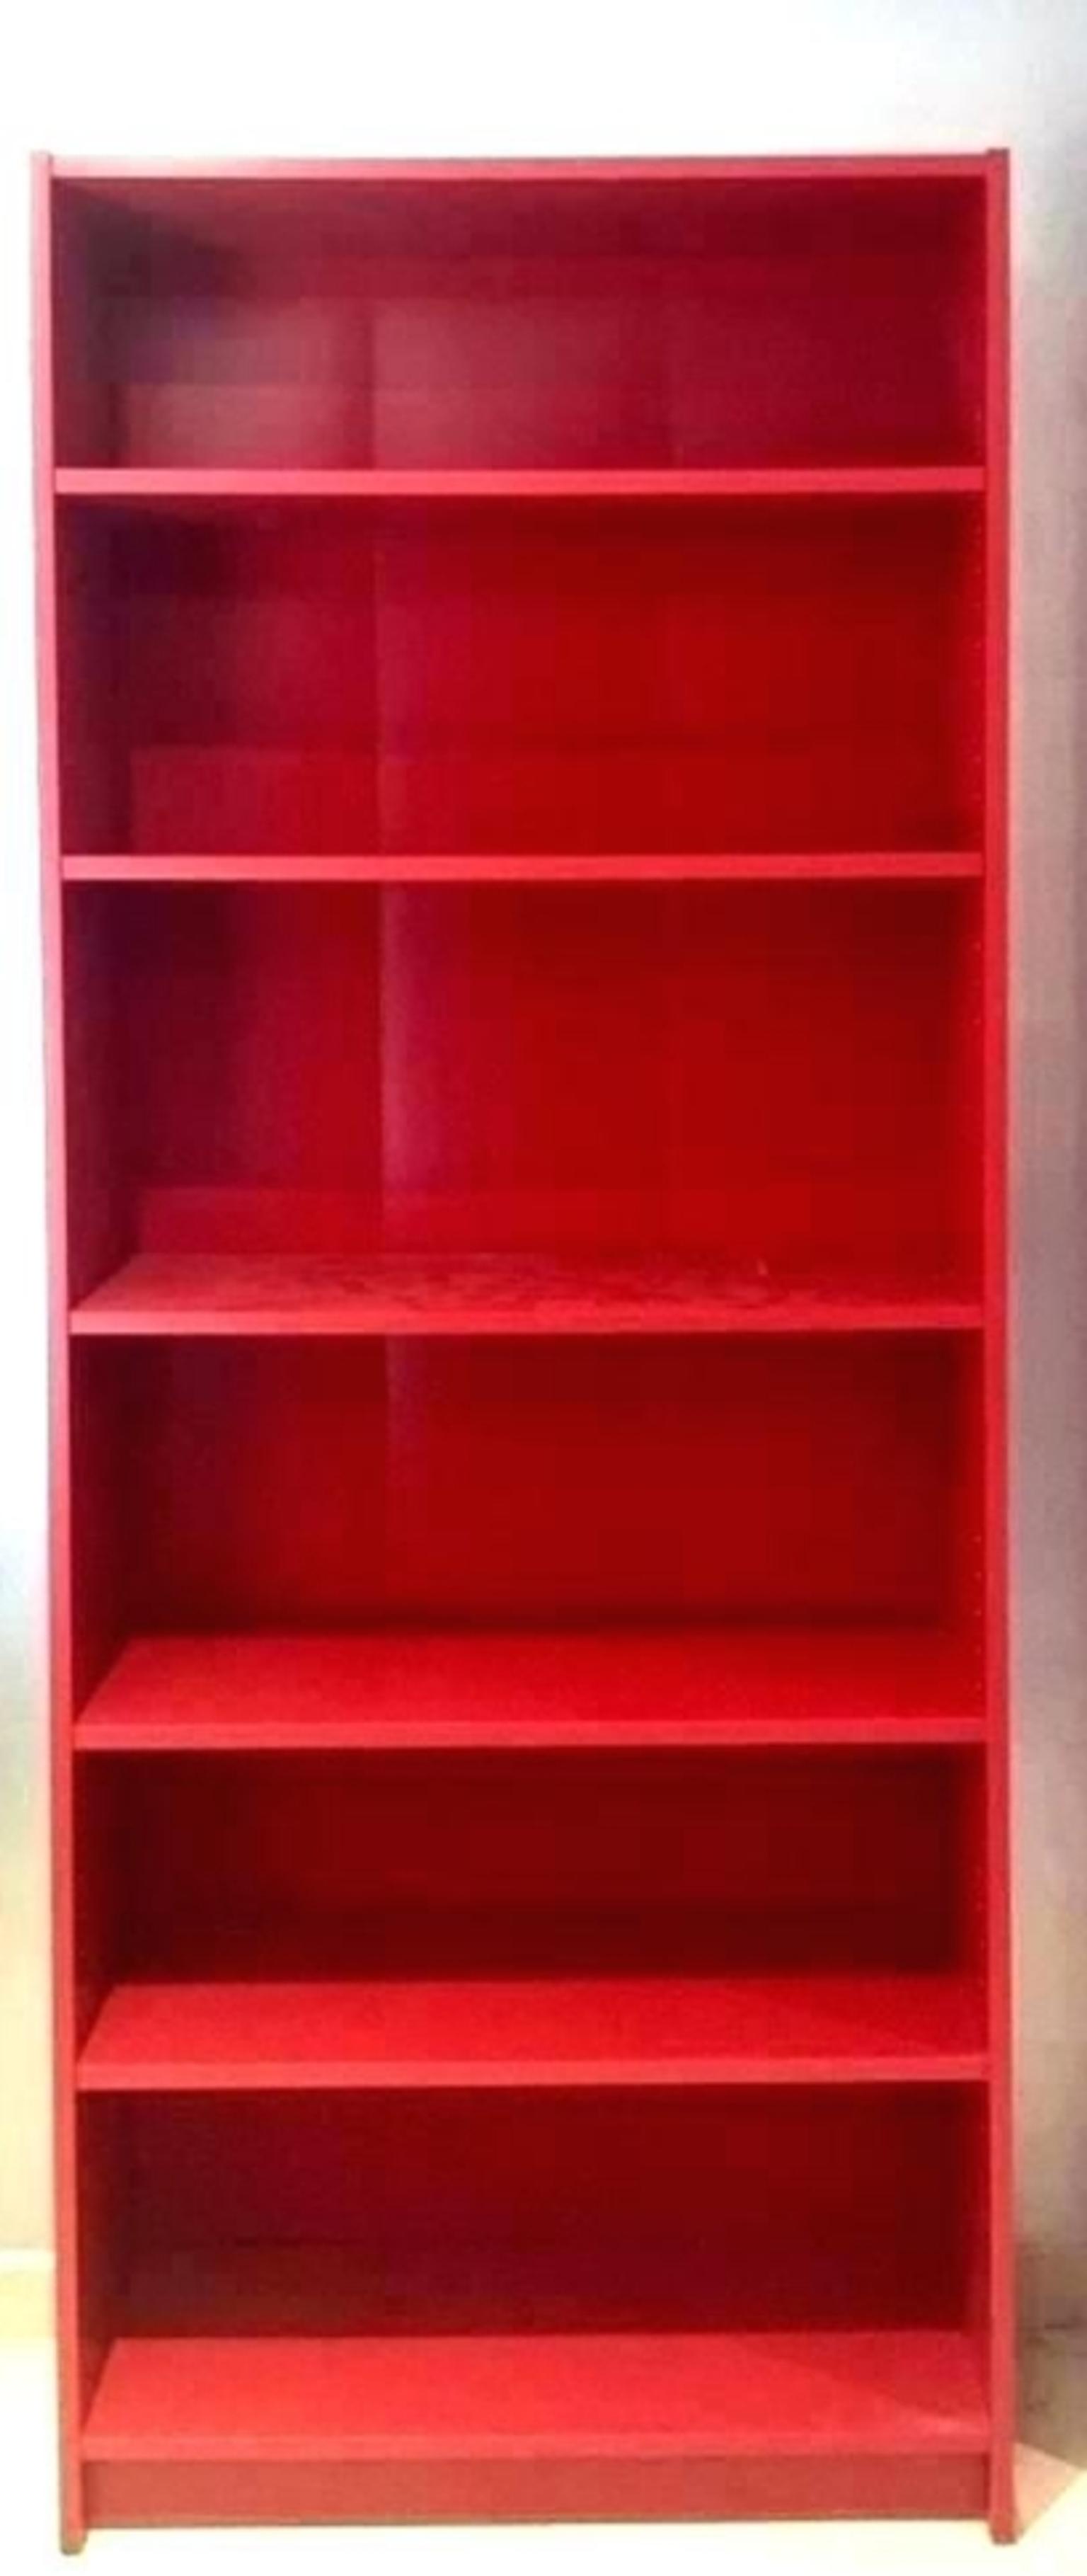 Ikea Red Bookcase In Ws2 Walsall For 15 00 For Sale Shpock